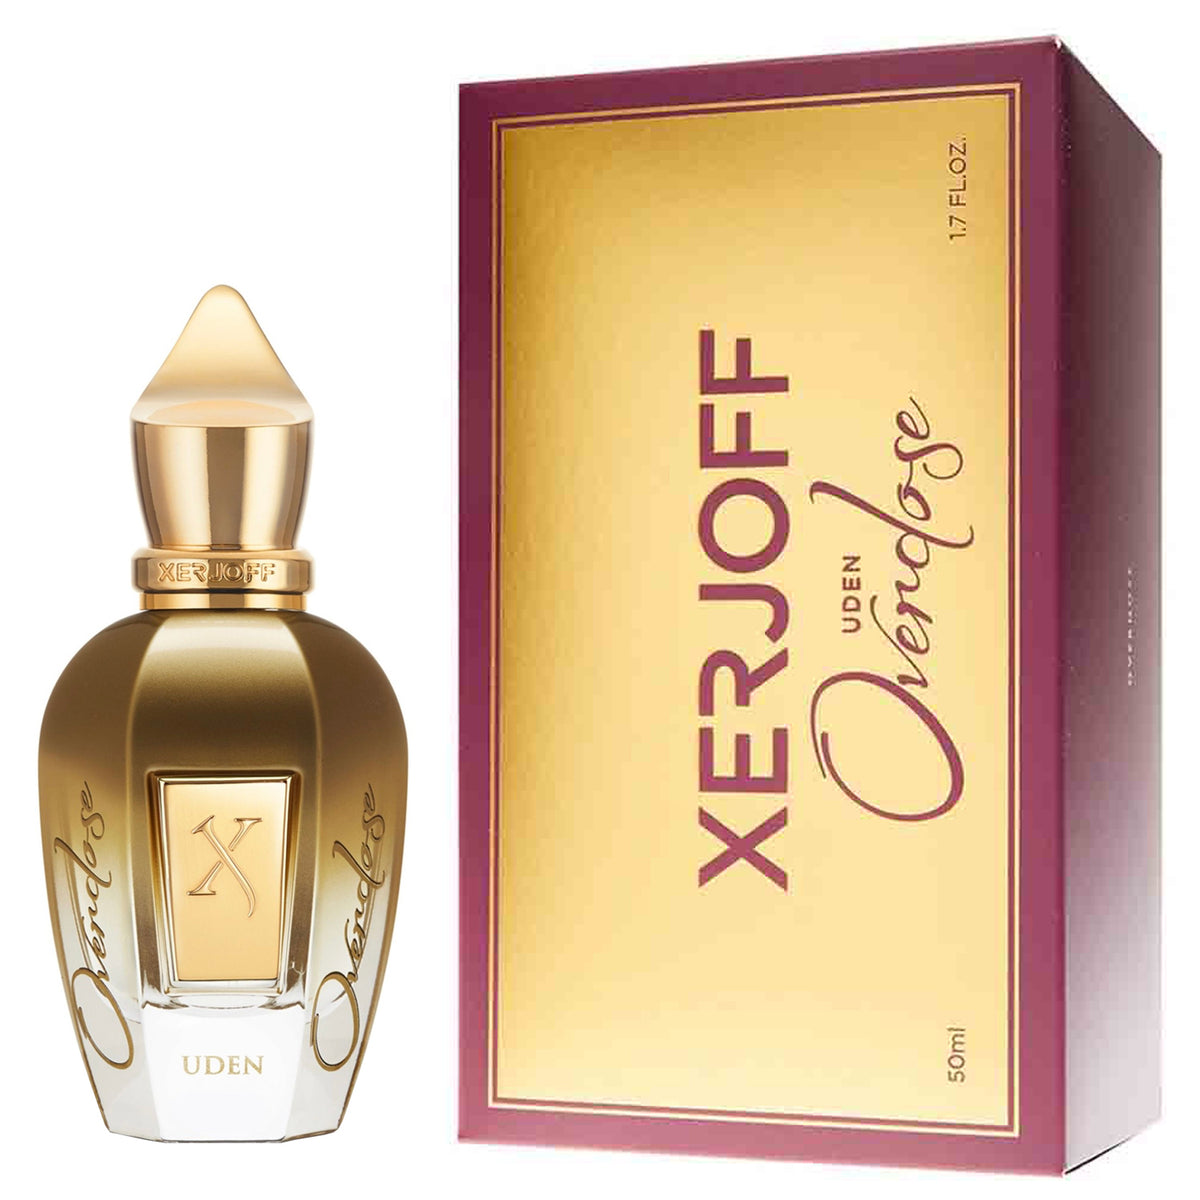 Xerjoff Oud star Collection MALESIA Decant spray sample